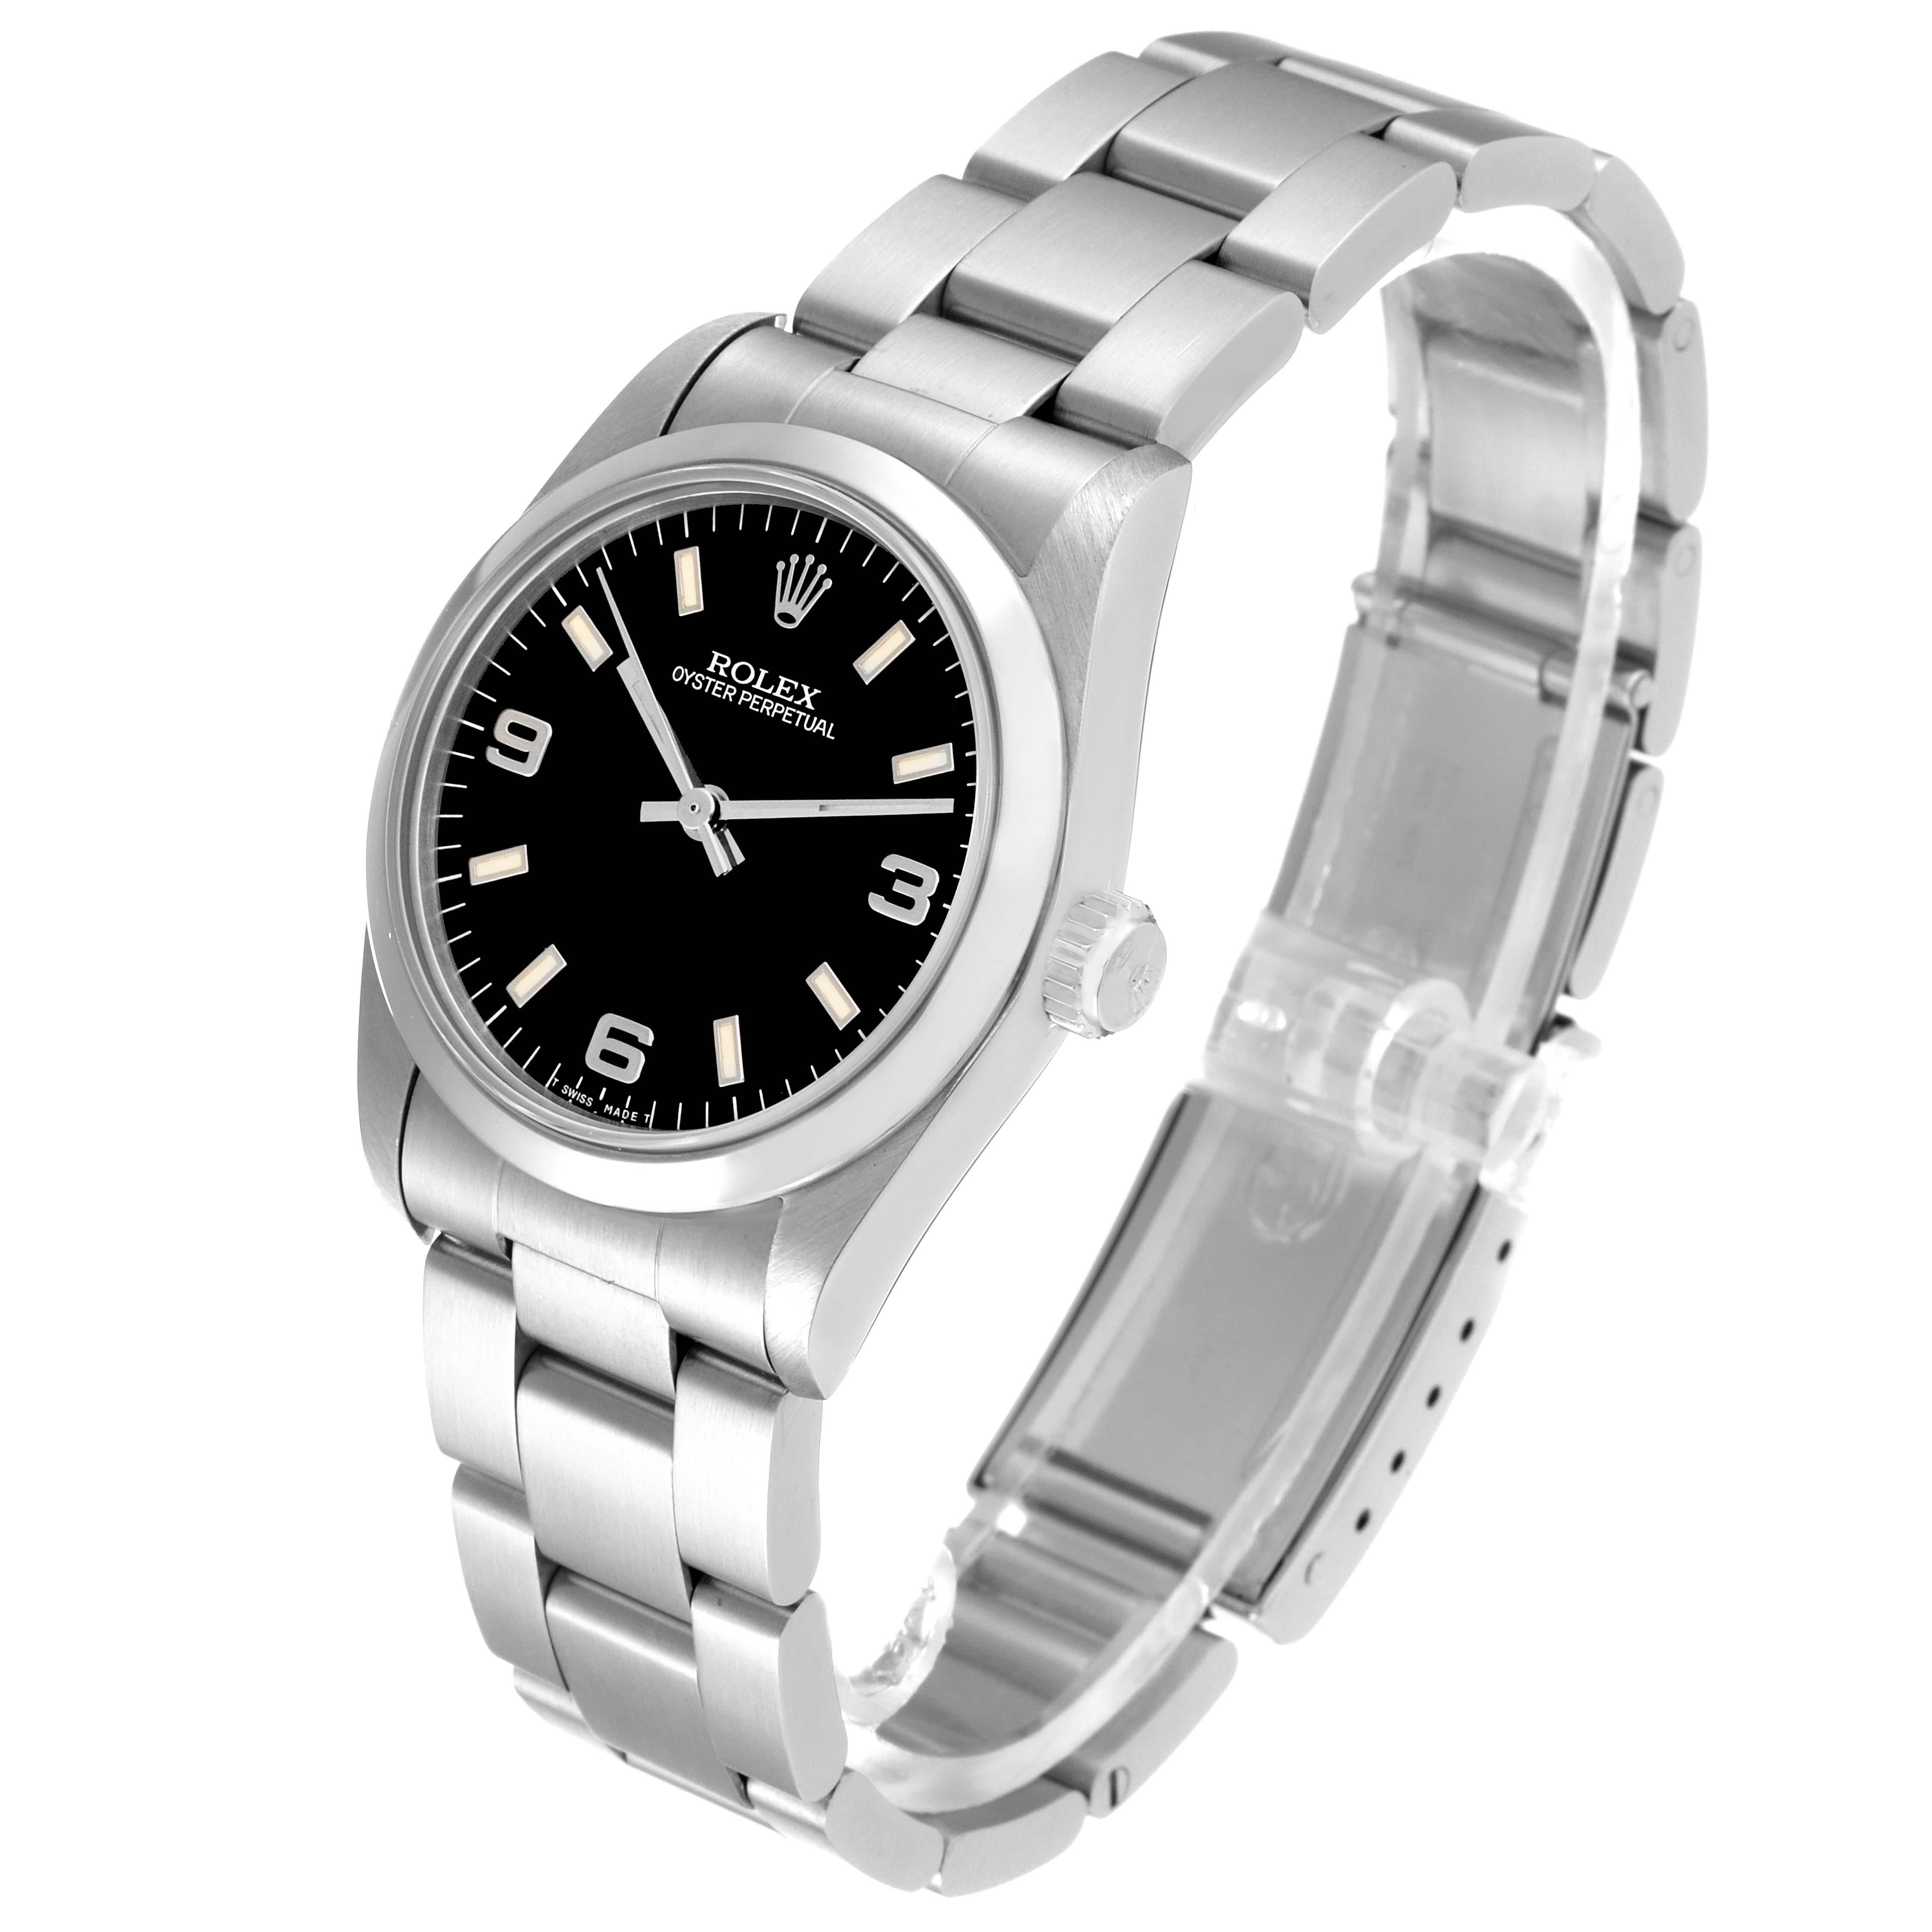 Rolex Oyster Perpetual Midsize Black Dial Steel Ladies Watch 67480. Automatic self-winding movement. Stainless steel oyster case 31.0 mm in diameter. Rolex logo on a crown. Stainless steel smooth bezel. Scratch resistant sapphire crystal. Black dial